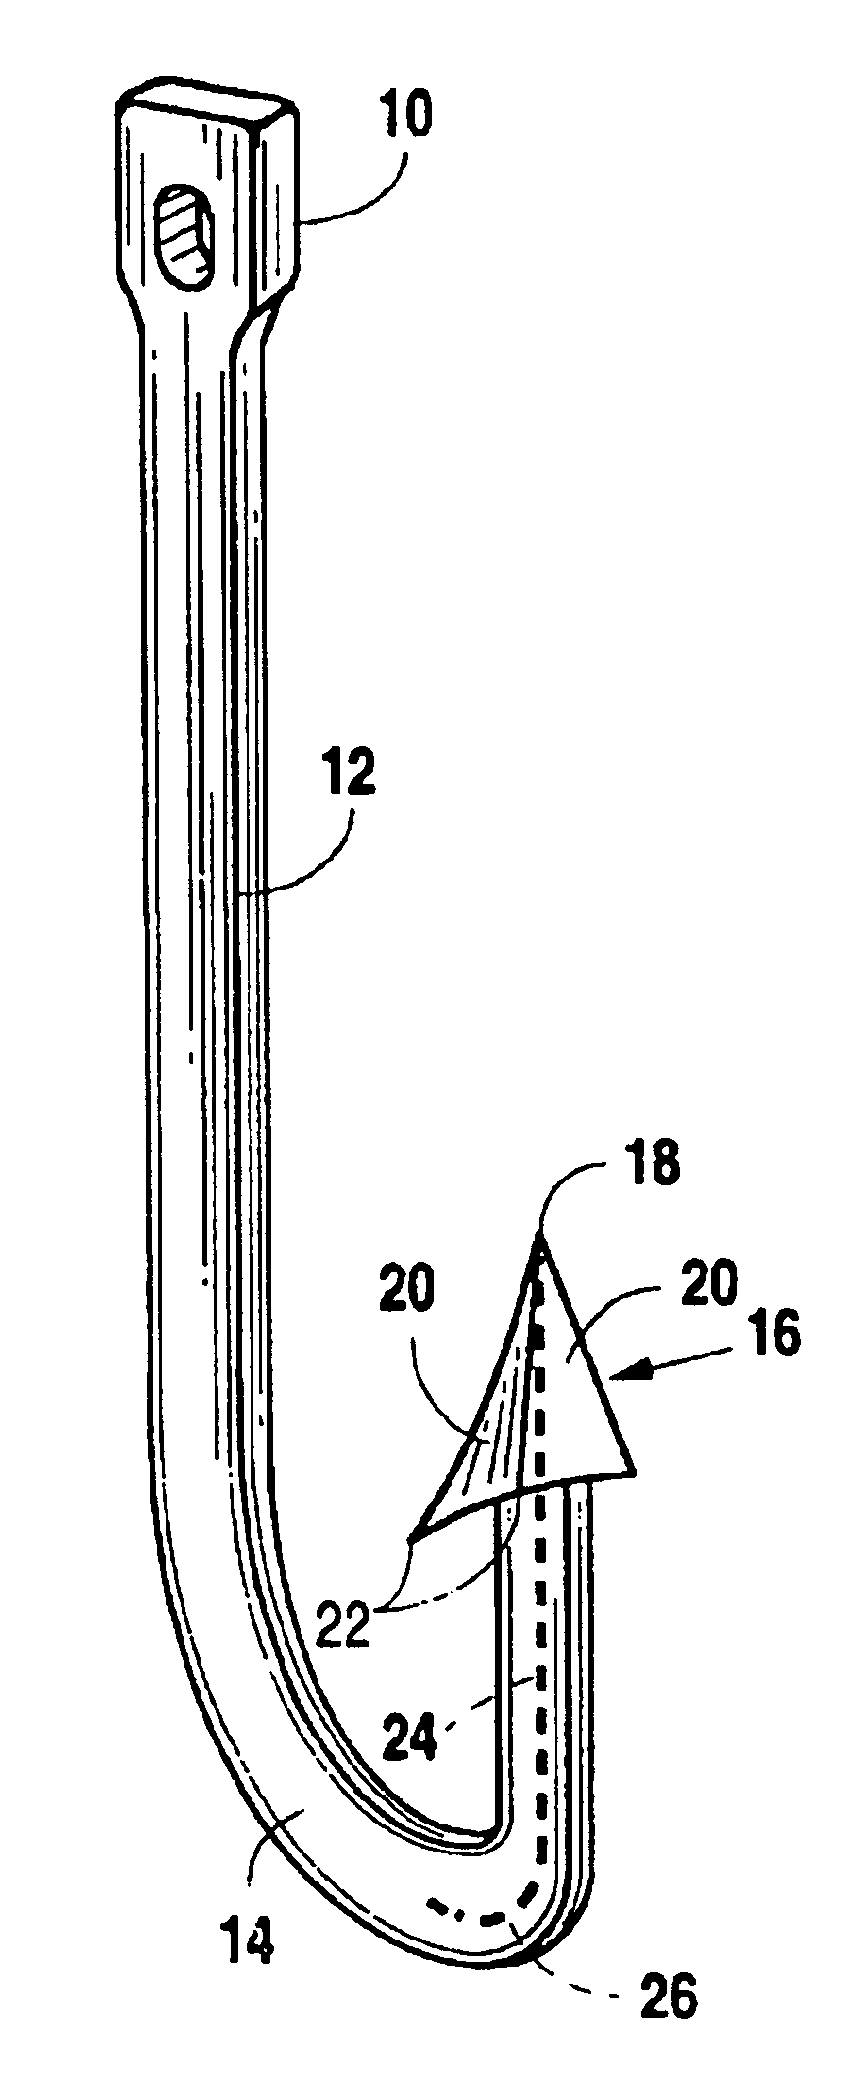 Composite fish hook having improved strength and penetration capability